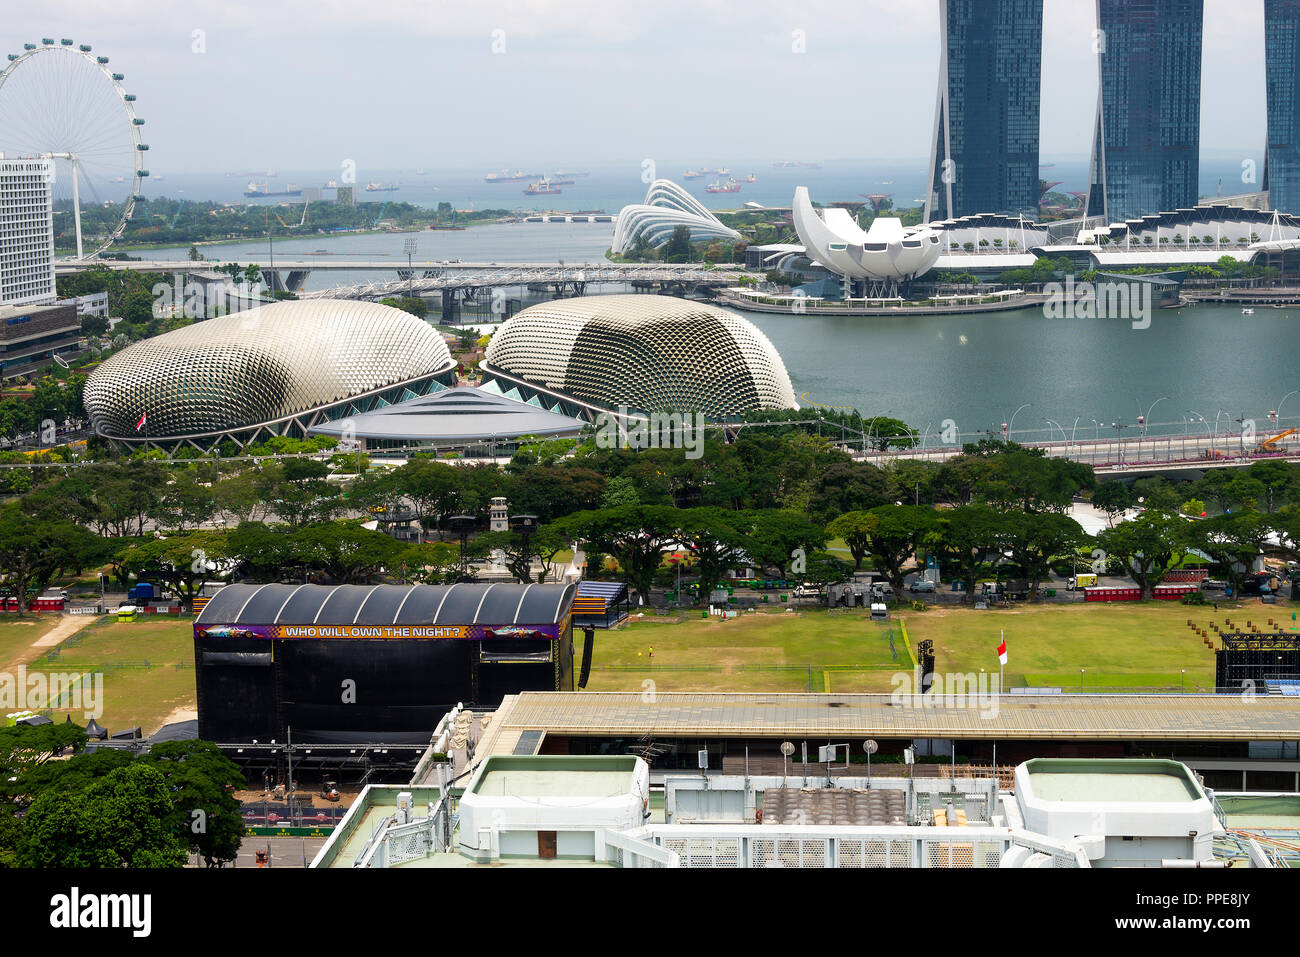 Aerial View of Esplanade Theatres by the Bay, Padang, Arts Science Museum, Gardens by the Bay and Singapore Flyer Republic of Singapore Asia Stock Photo